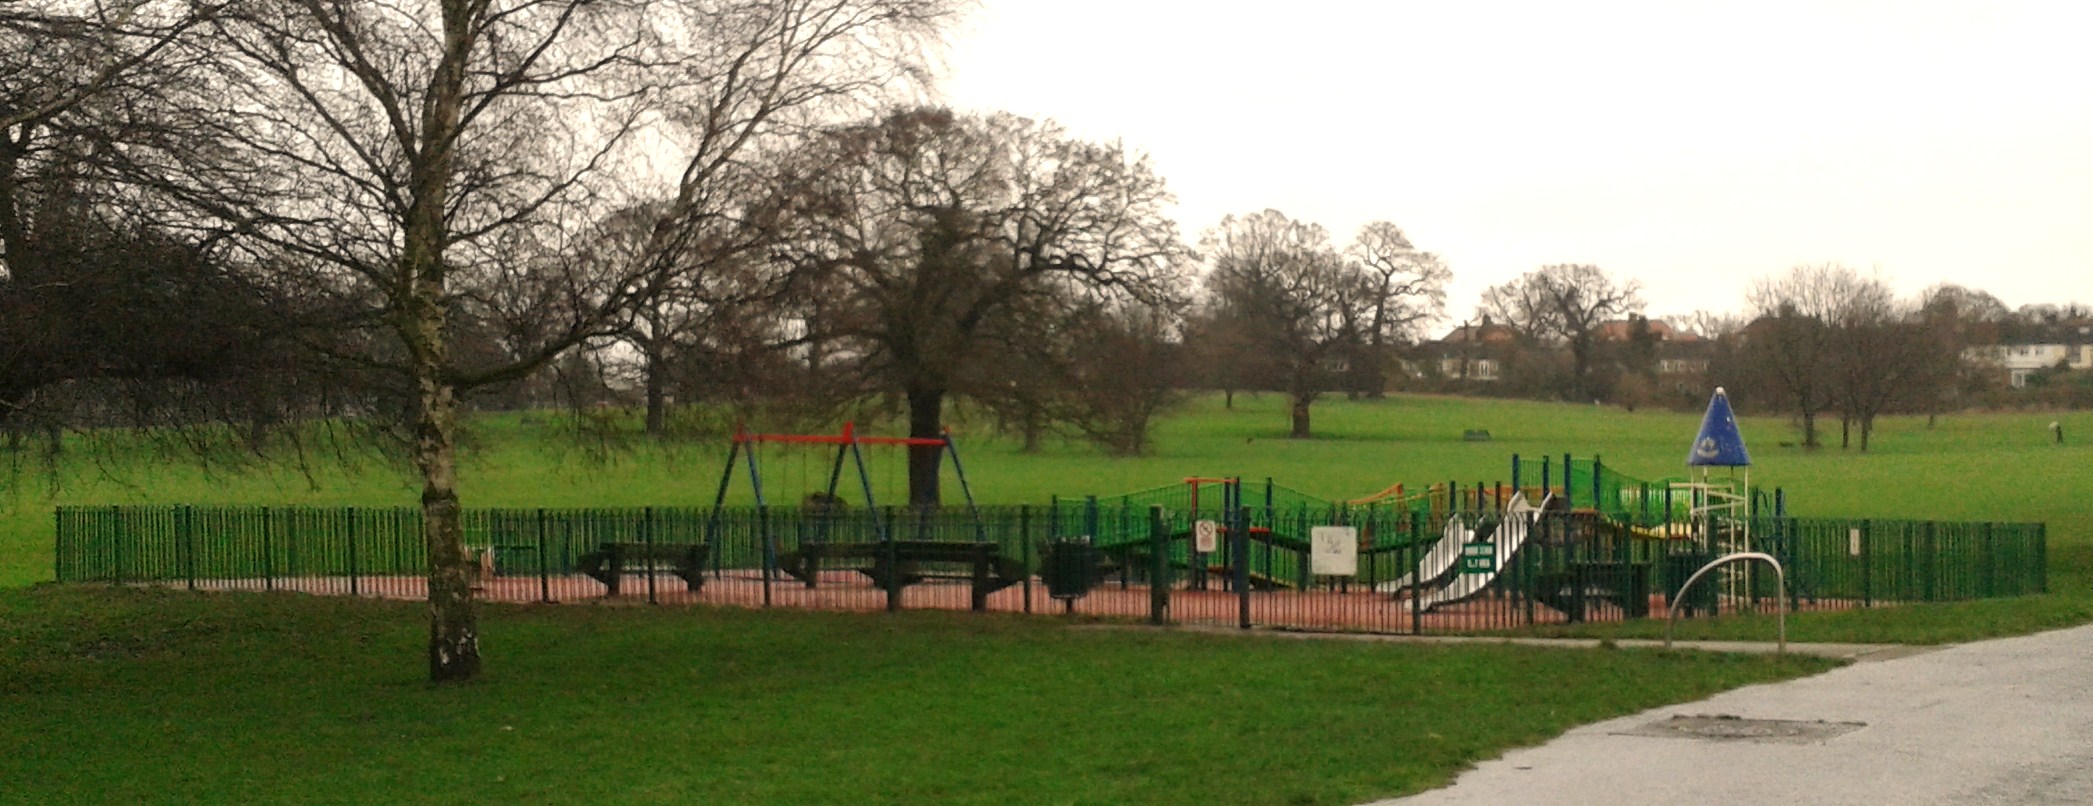 Play Improvements in The Highams Park – What are Your Views? Please Complete the on-line survey!